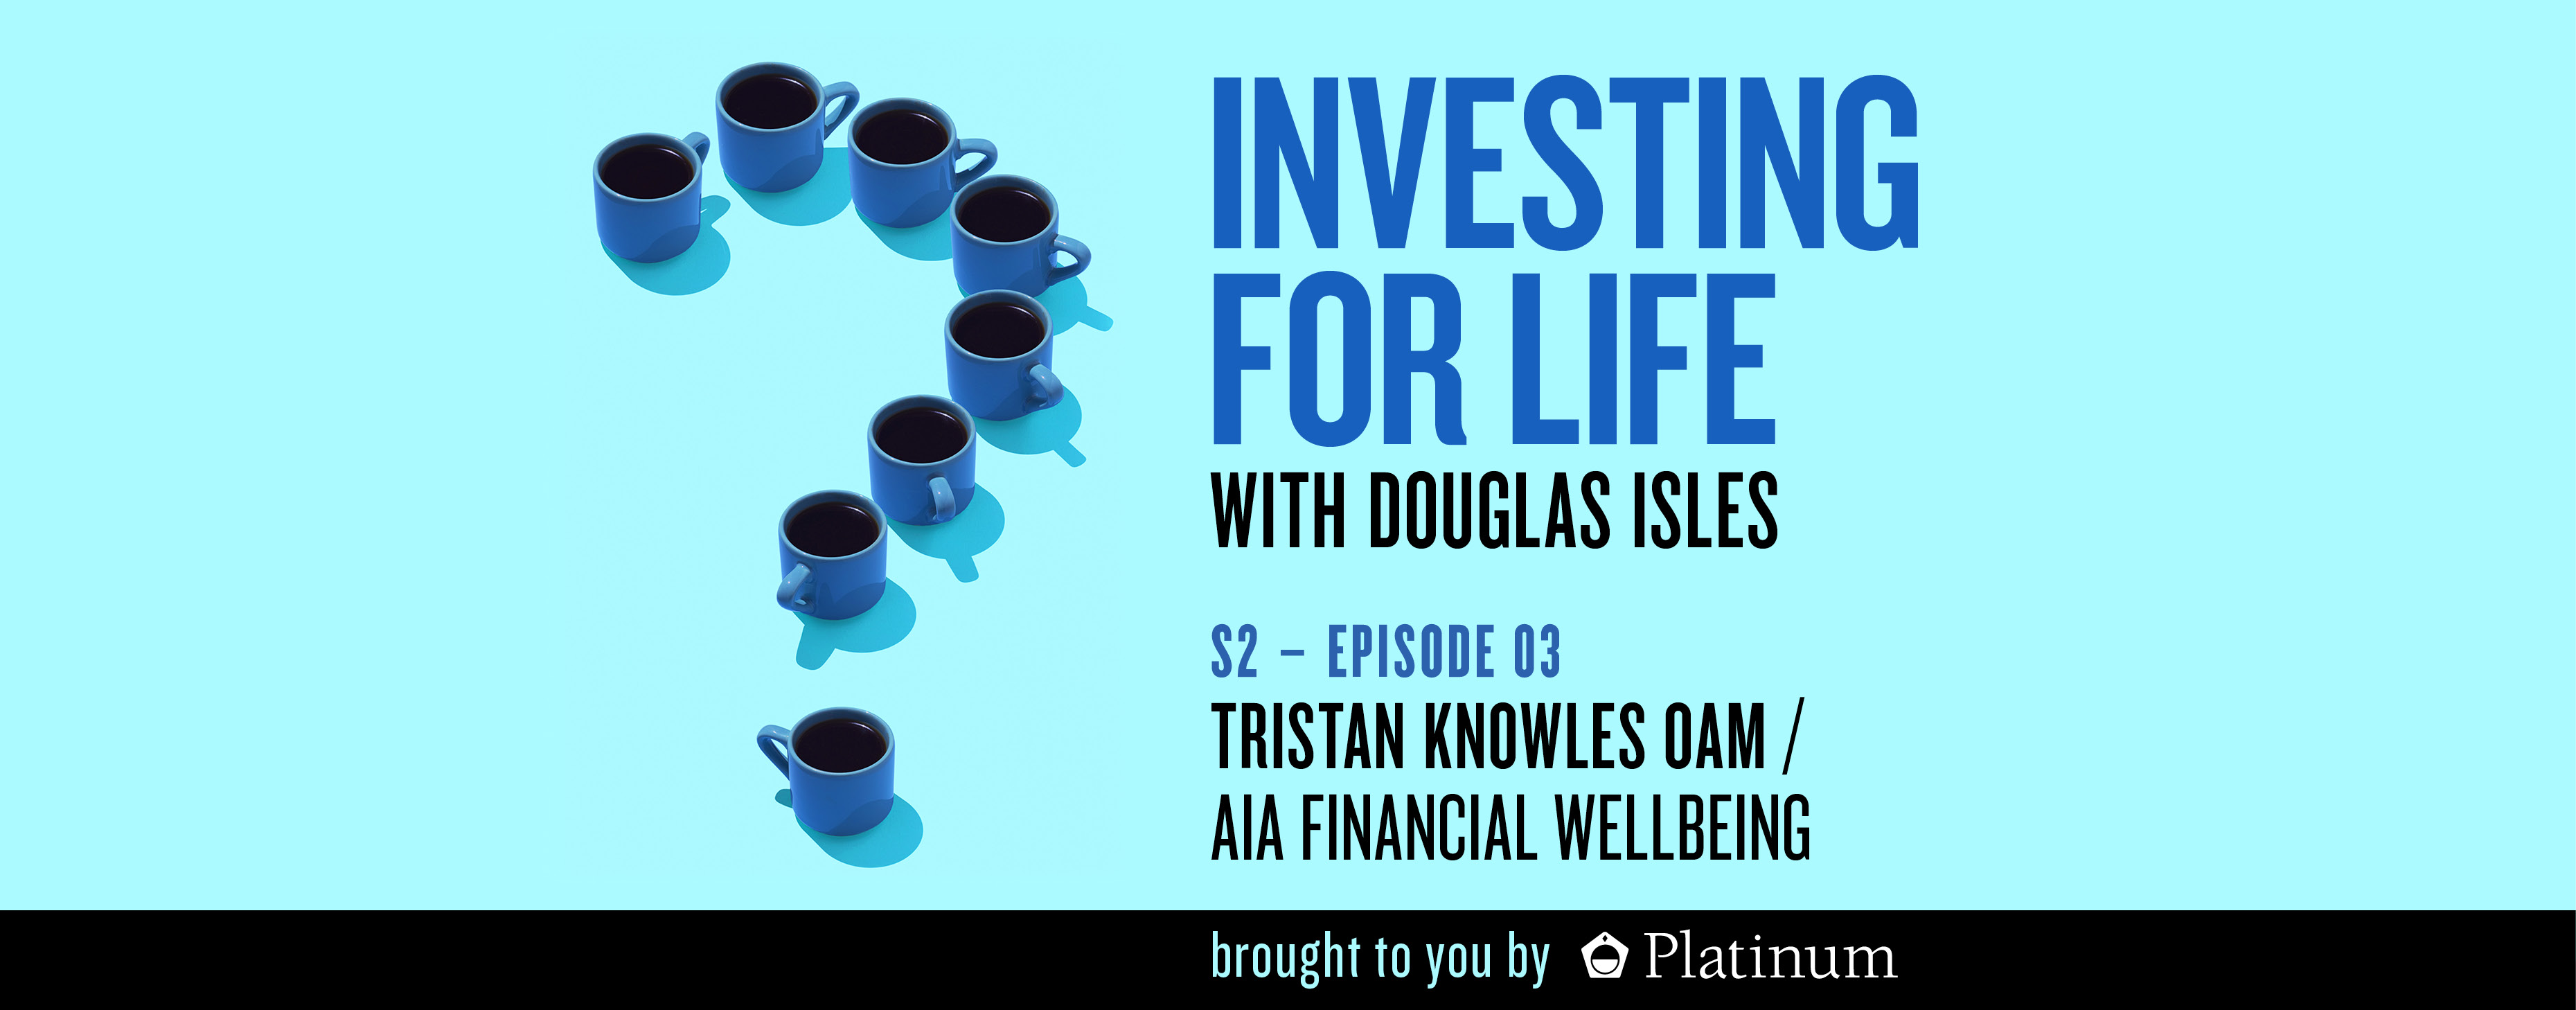 Investing for Life Podcast – Tristan Knowles, OAM, Advice Manager, AIA Financial Wellbeing